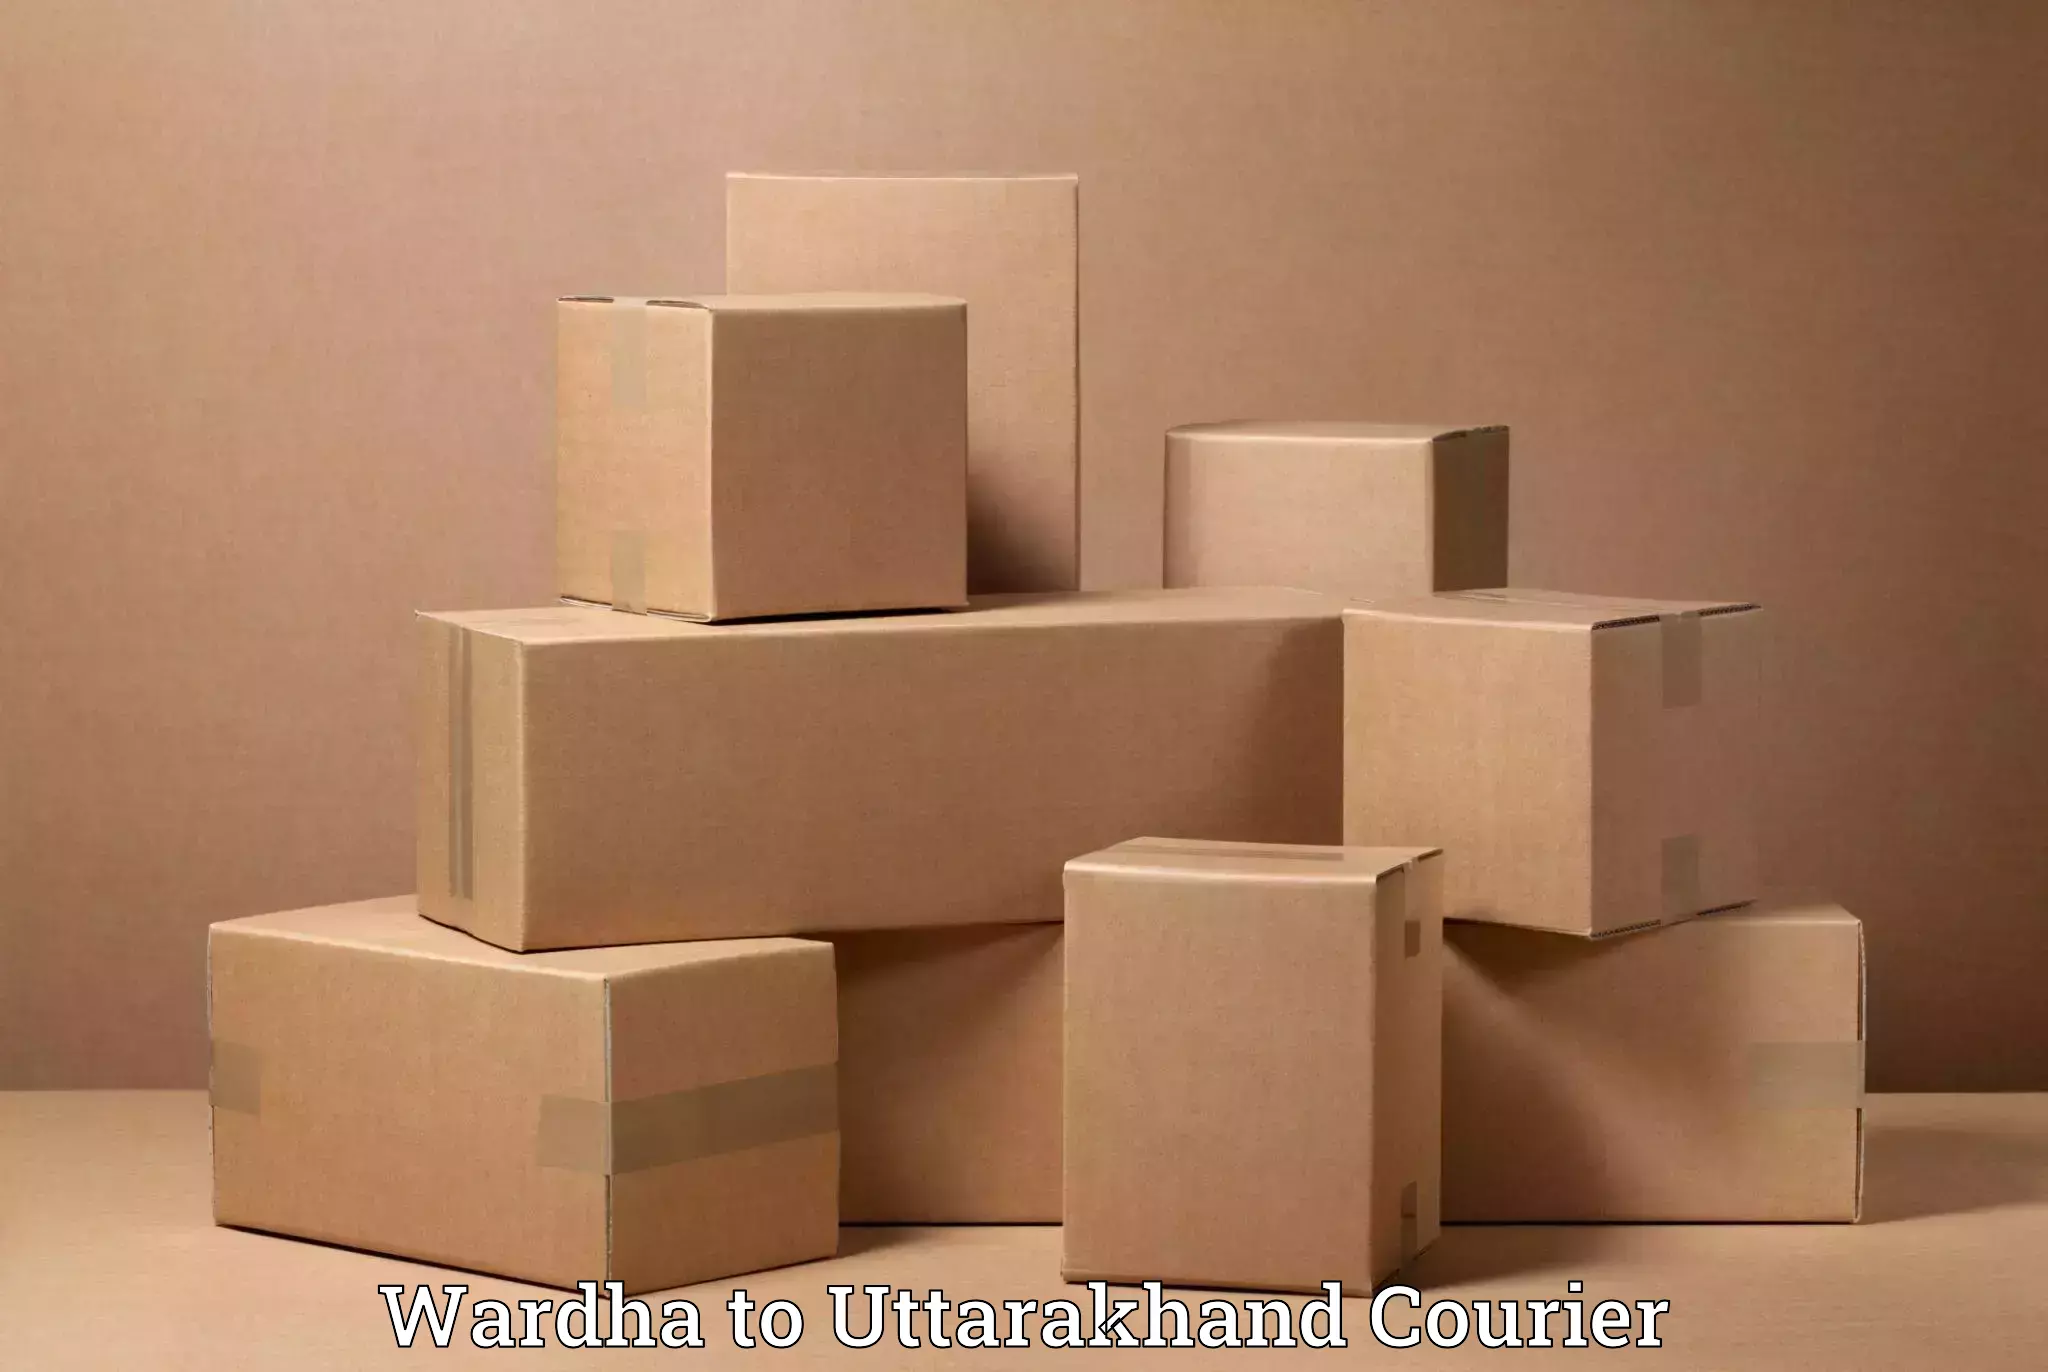 Furniture delivery service Wardha to IIT Roorkee